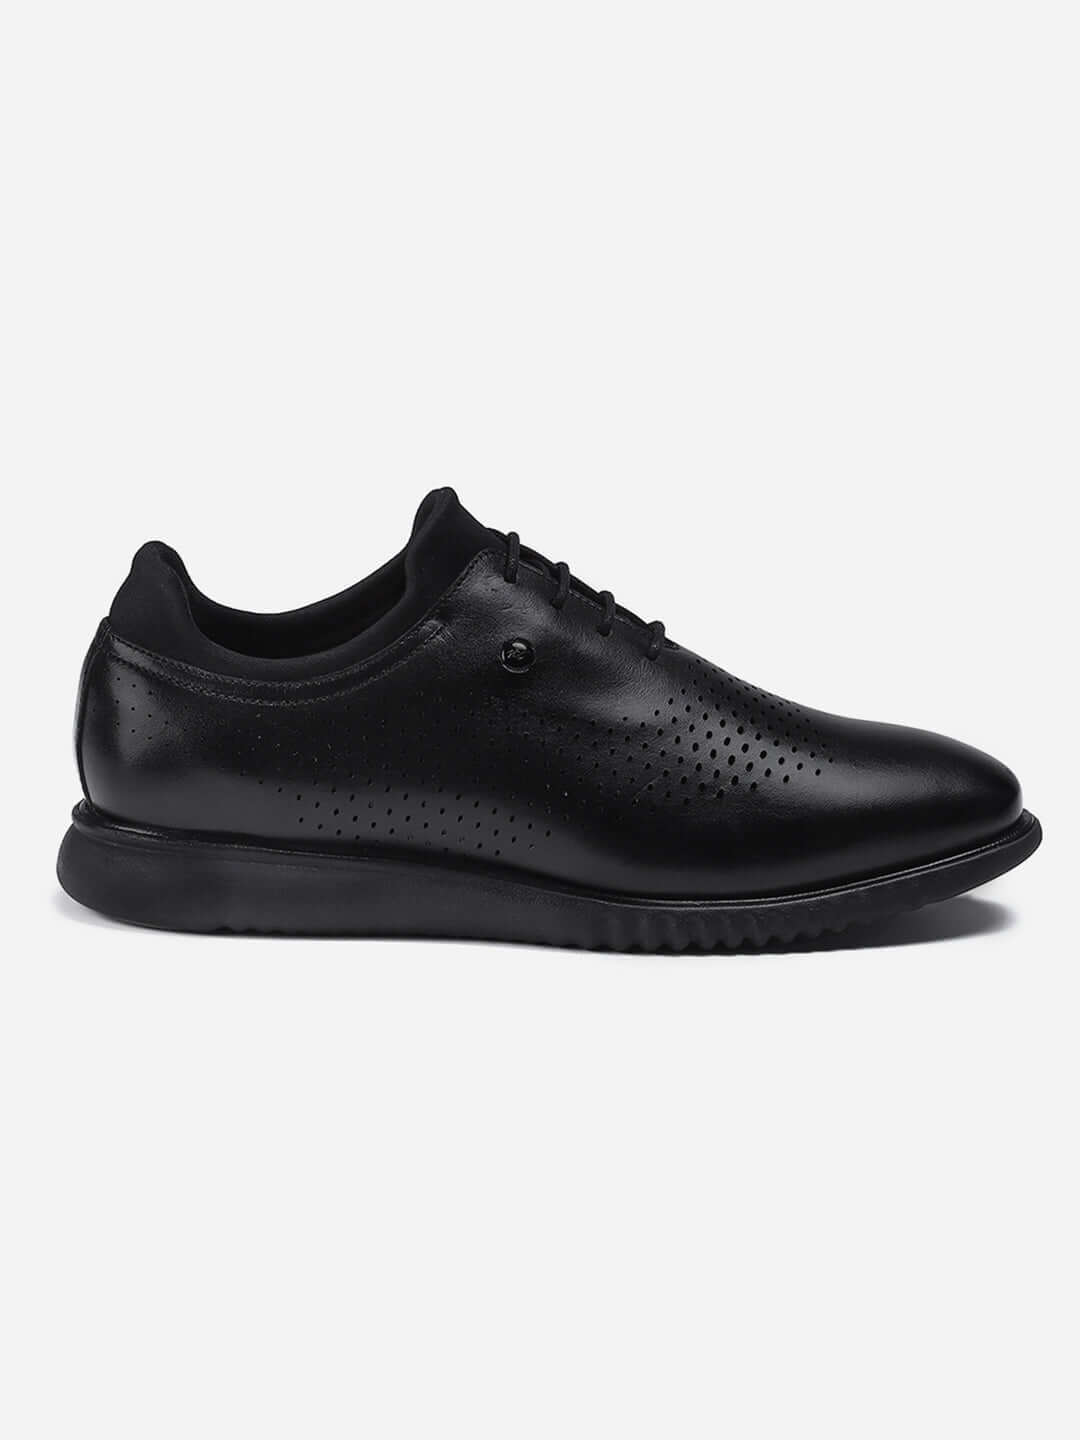 Men Black Lace Up Genuine Leather Casual Shoes